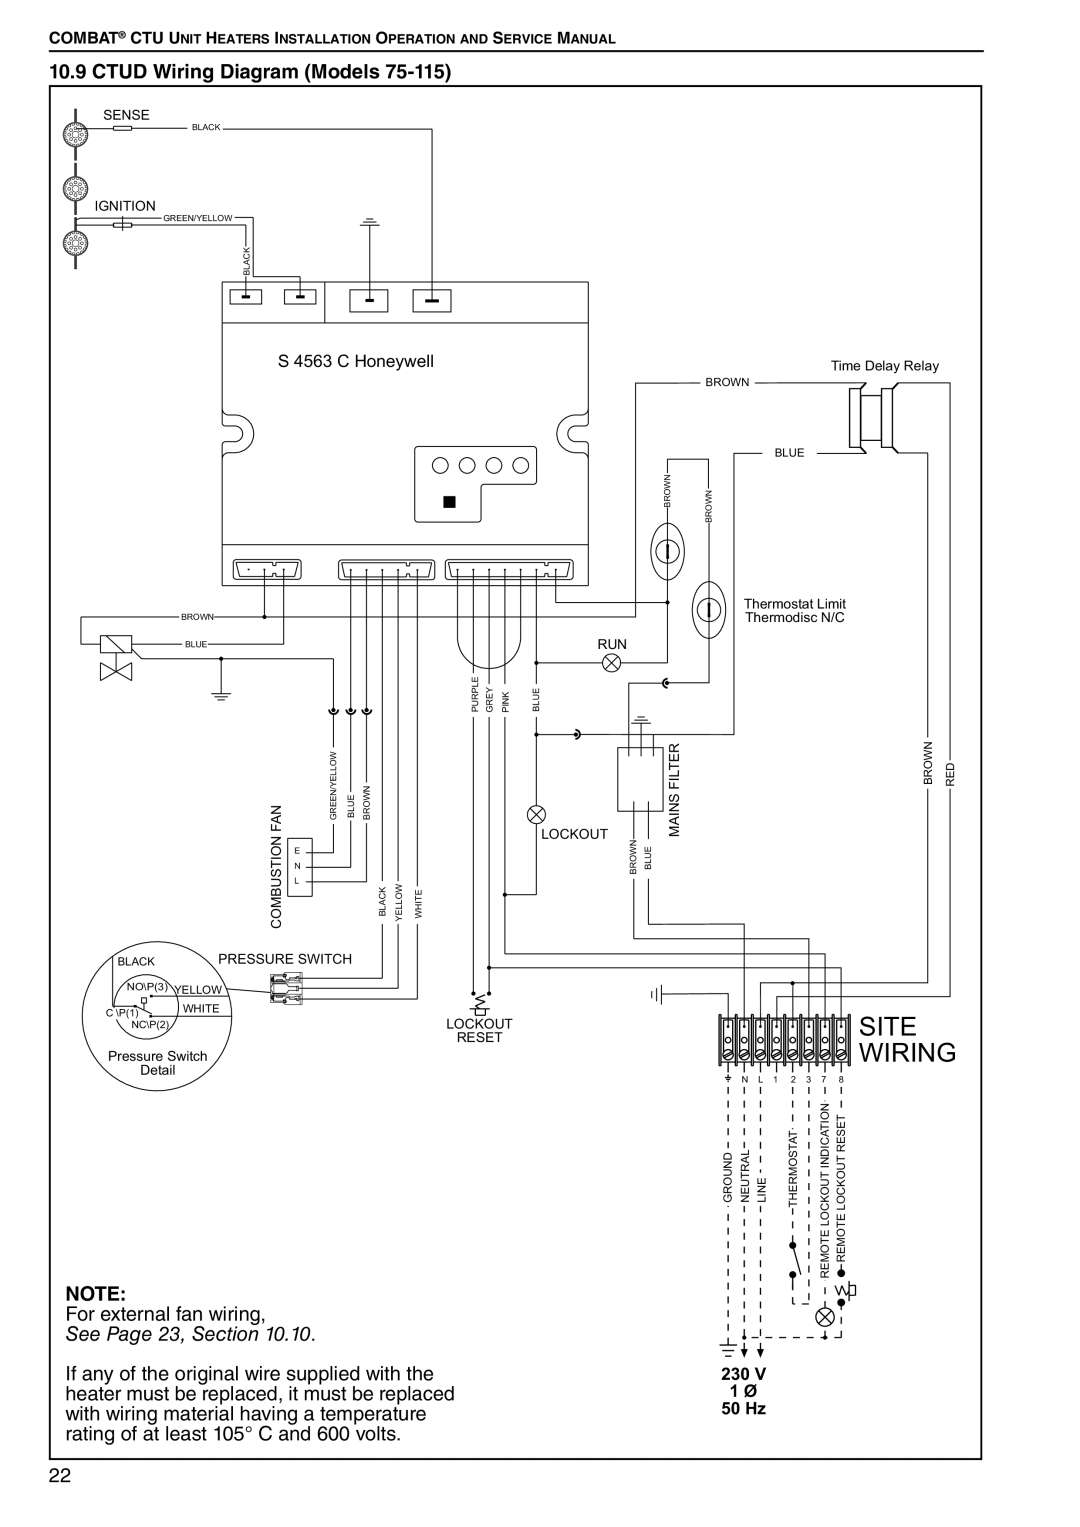 Roberts Gorden CTU 22 TO 115 service manual Site, CTUD Wiring Diagram Models, See Page 23, Section 